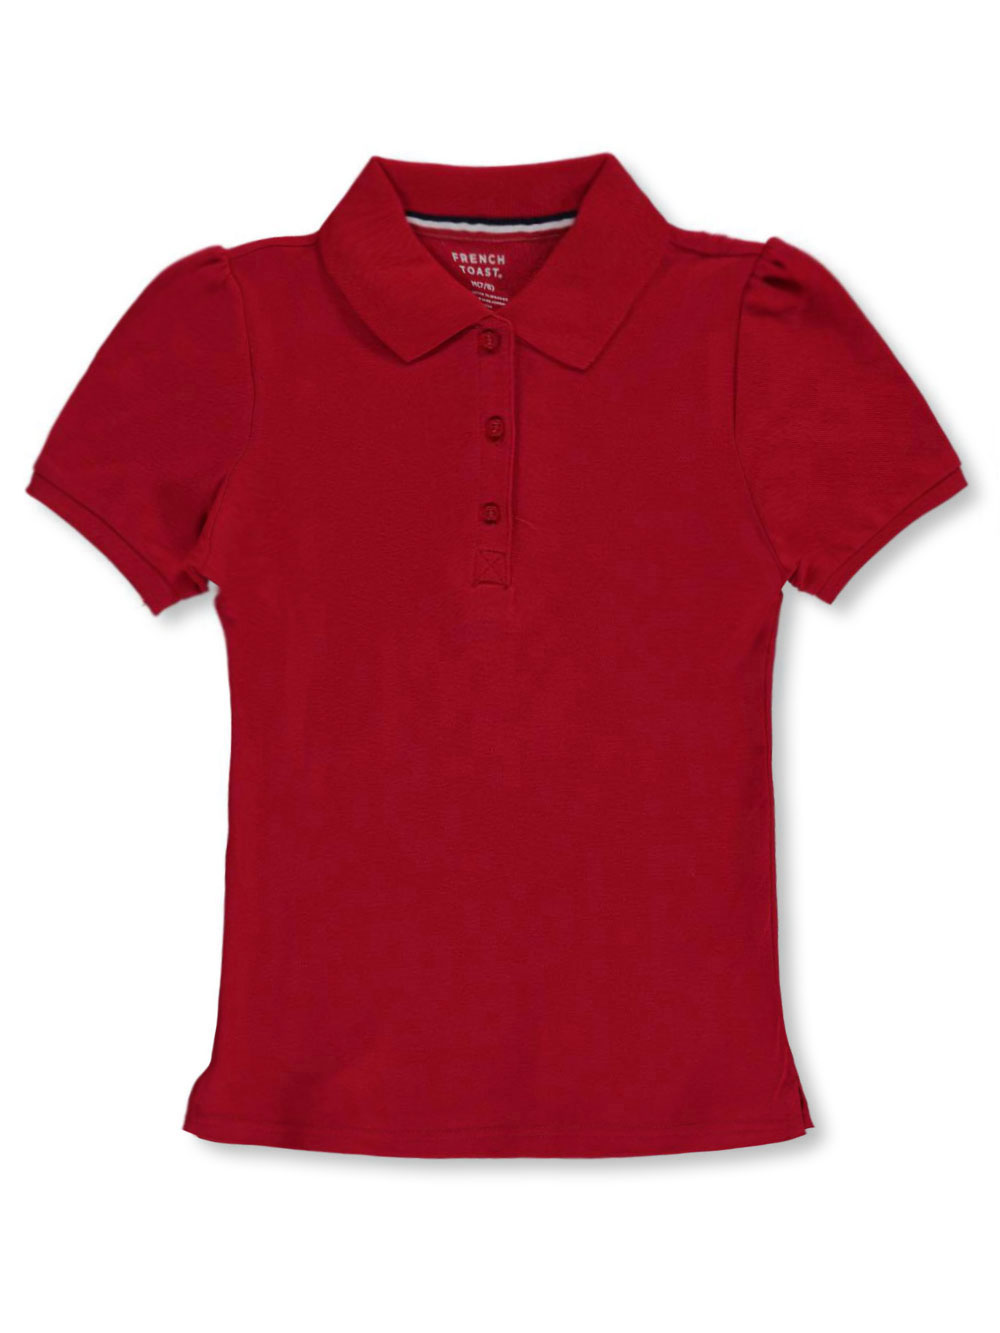 At School by French Toast French Toast Girls' S/S Knit Polo - red, 4/5